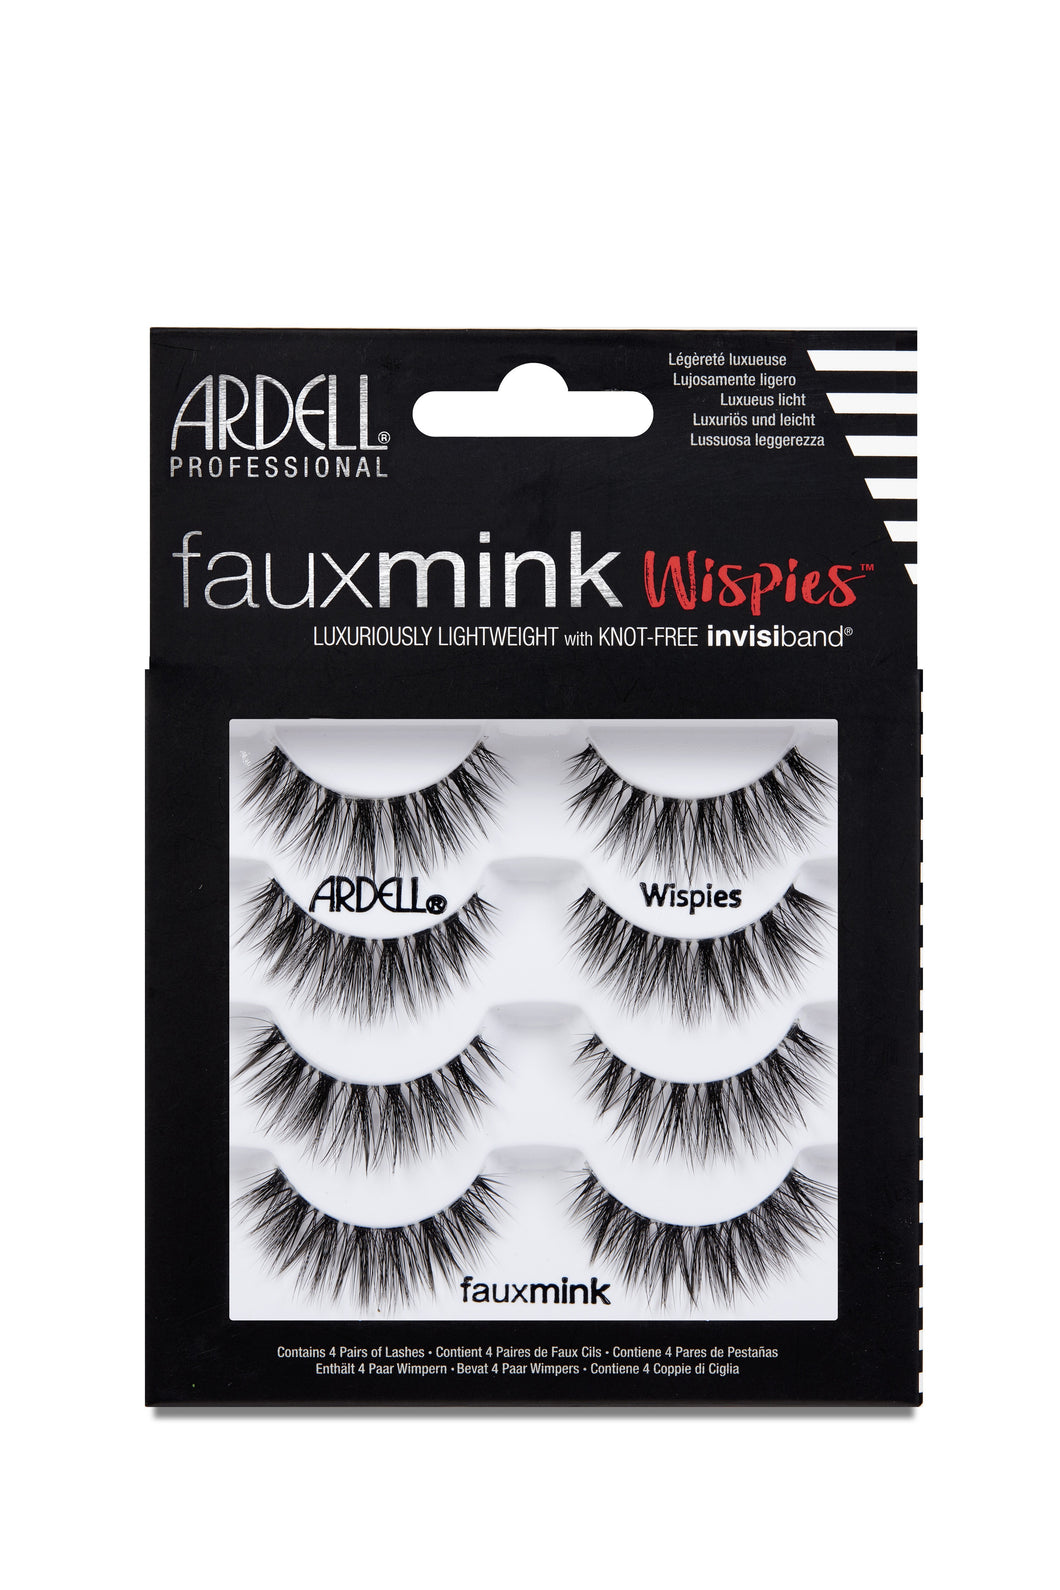 Ardell Fauxmink Lashes, Wispies - 4 Pairs #67509-Beauty Zone Nail Supply